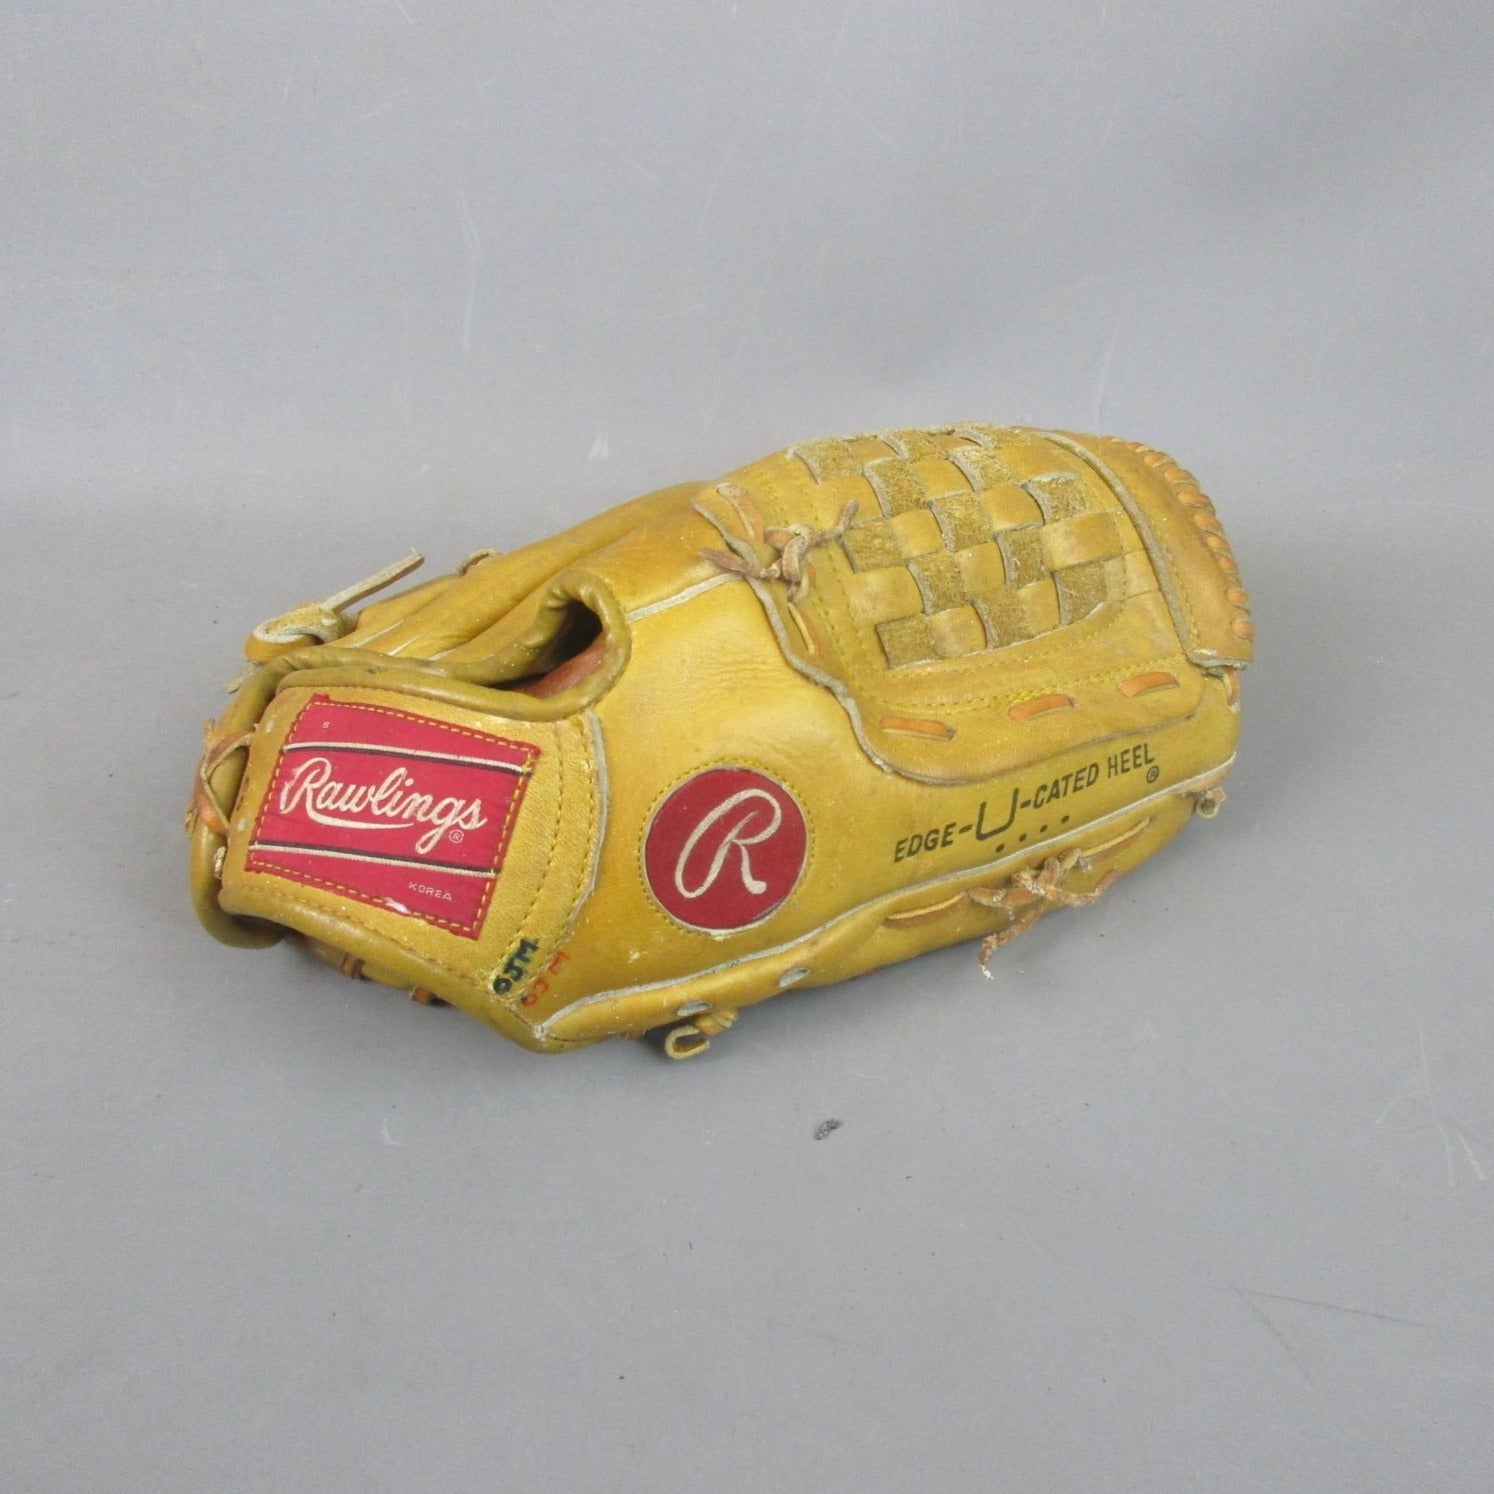 Hand Stitched Brown Leather Rawlings Baseball Glove Vintage c1970